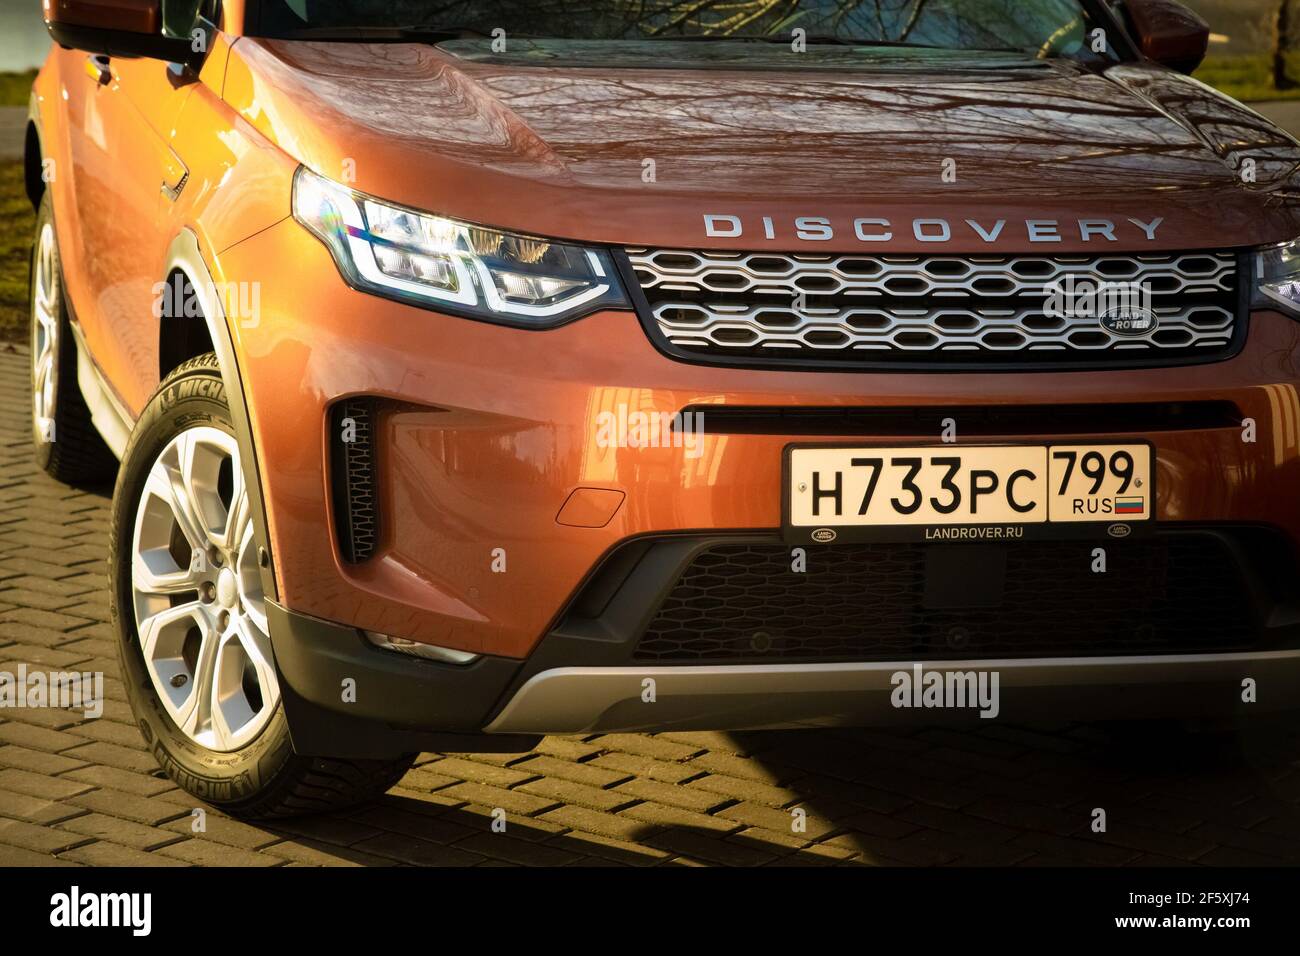 Moscow, Russia - December 20, 2019: All new Land Rover Discovery Sport 2019 is parked on the park. Close up side front view. Headlights, bumper and hood of orange suv, silver wheels, .. Stock Photo